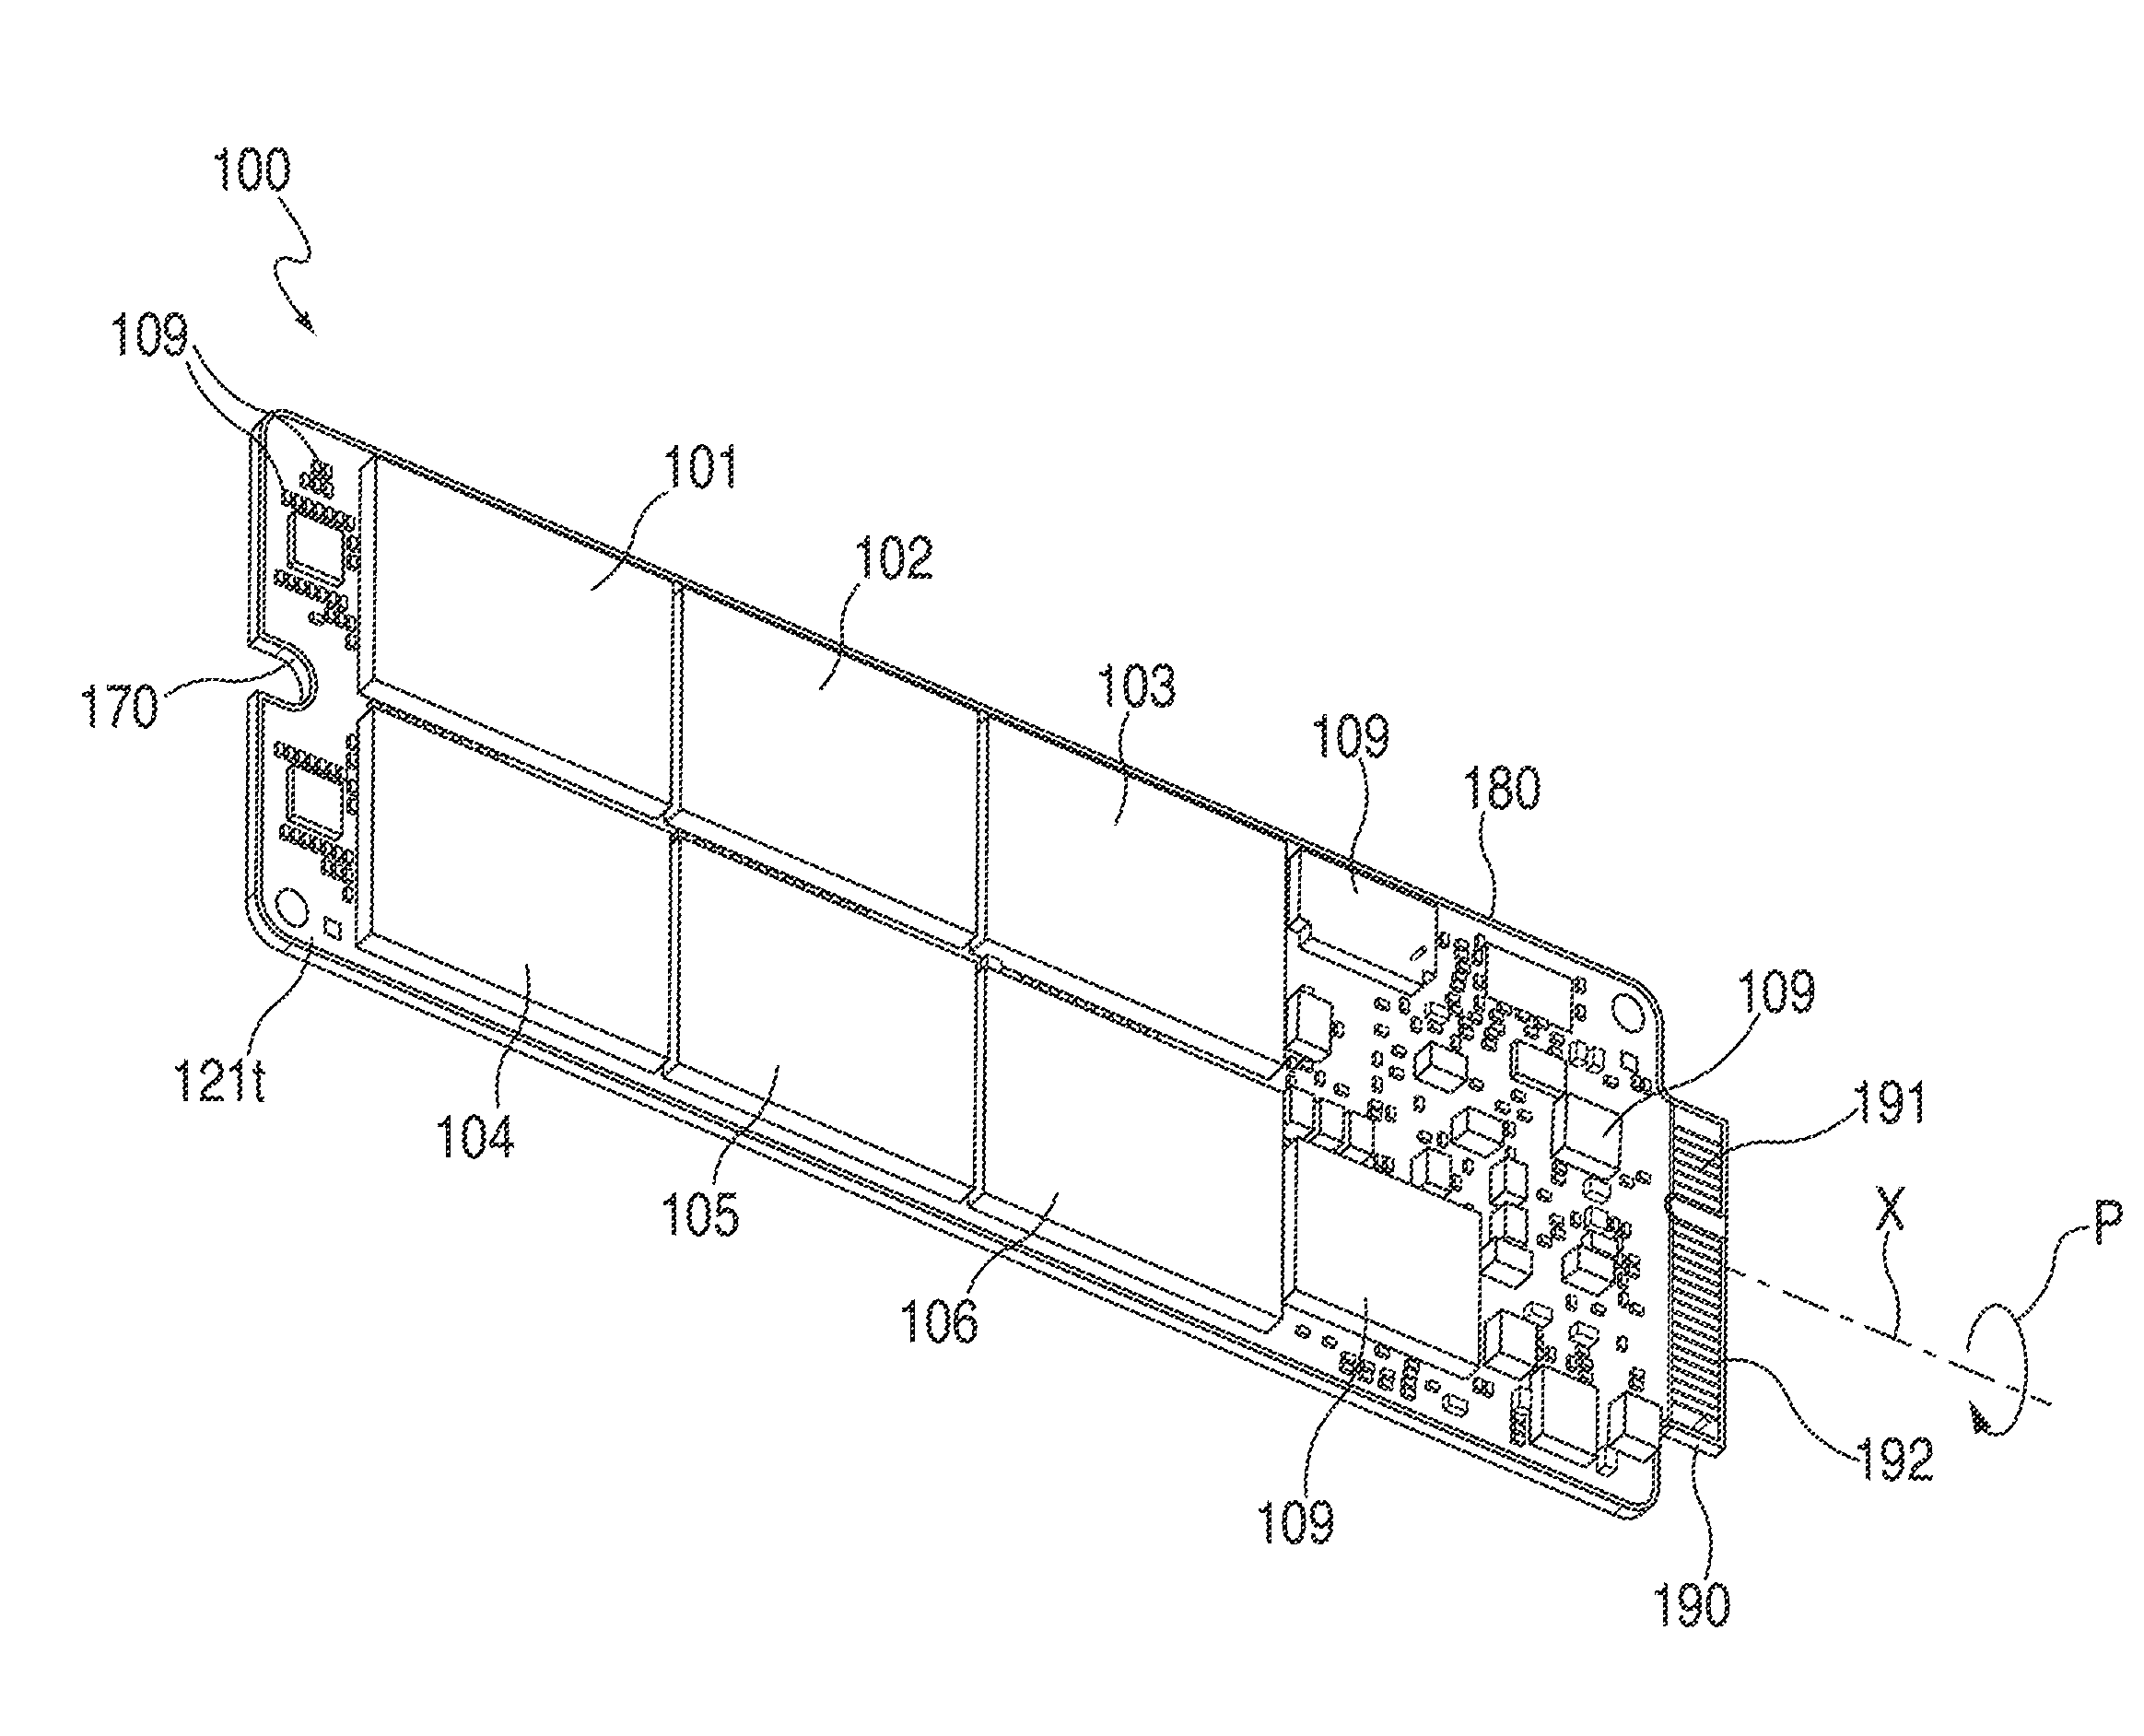 Board assemblies with minimized warpage and systems and methods for making the same